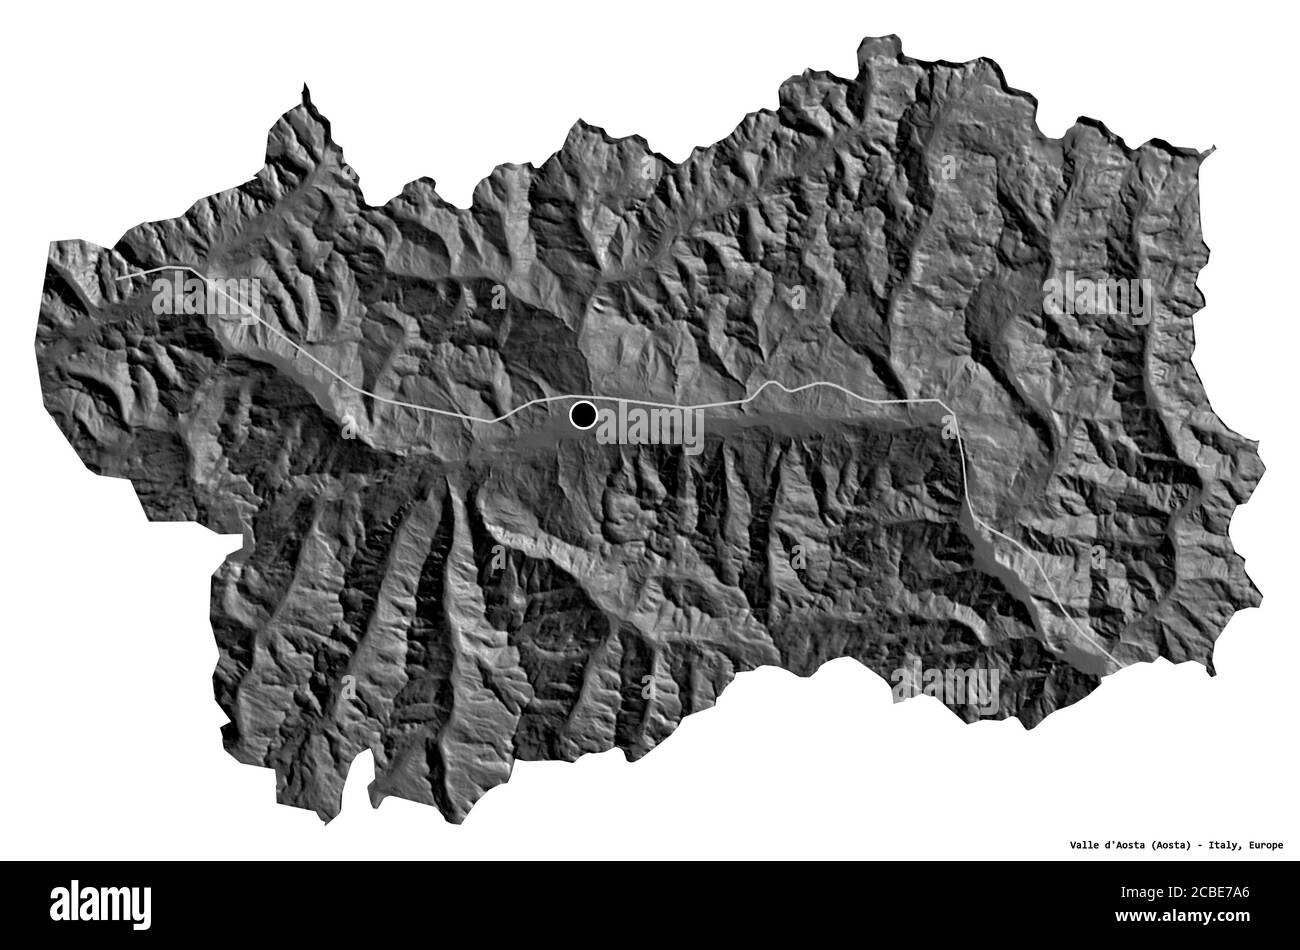 Shape of Valle d'Aosta, autonomous region of Italy, with its capital isolated on white background. Bilevel elevation map. 3D rendering Stock Photo